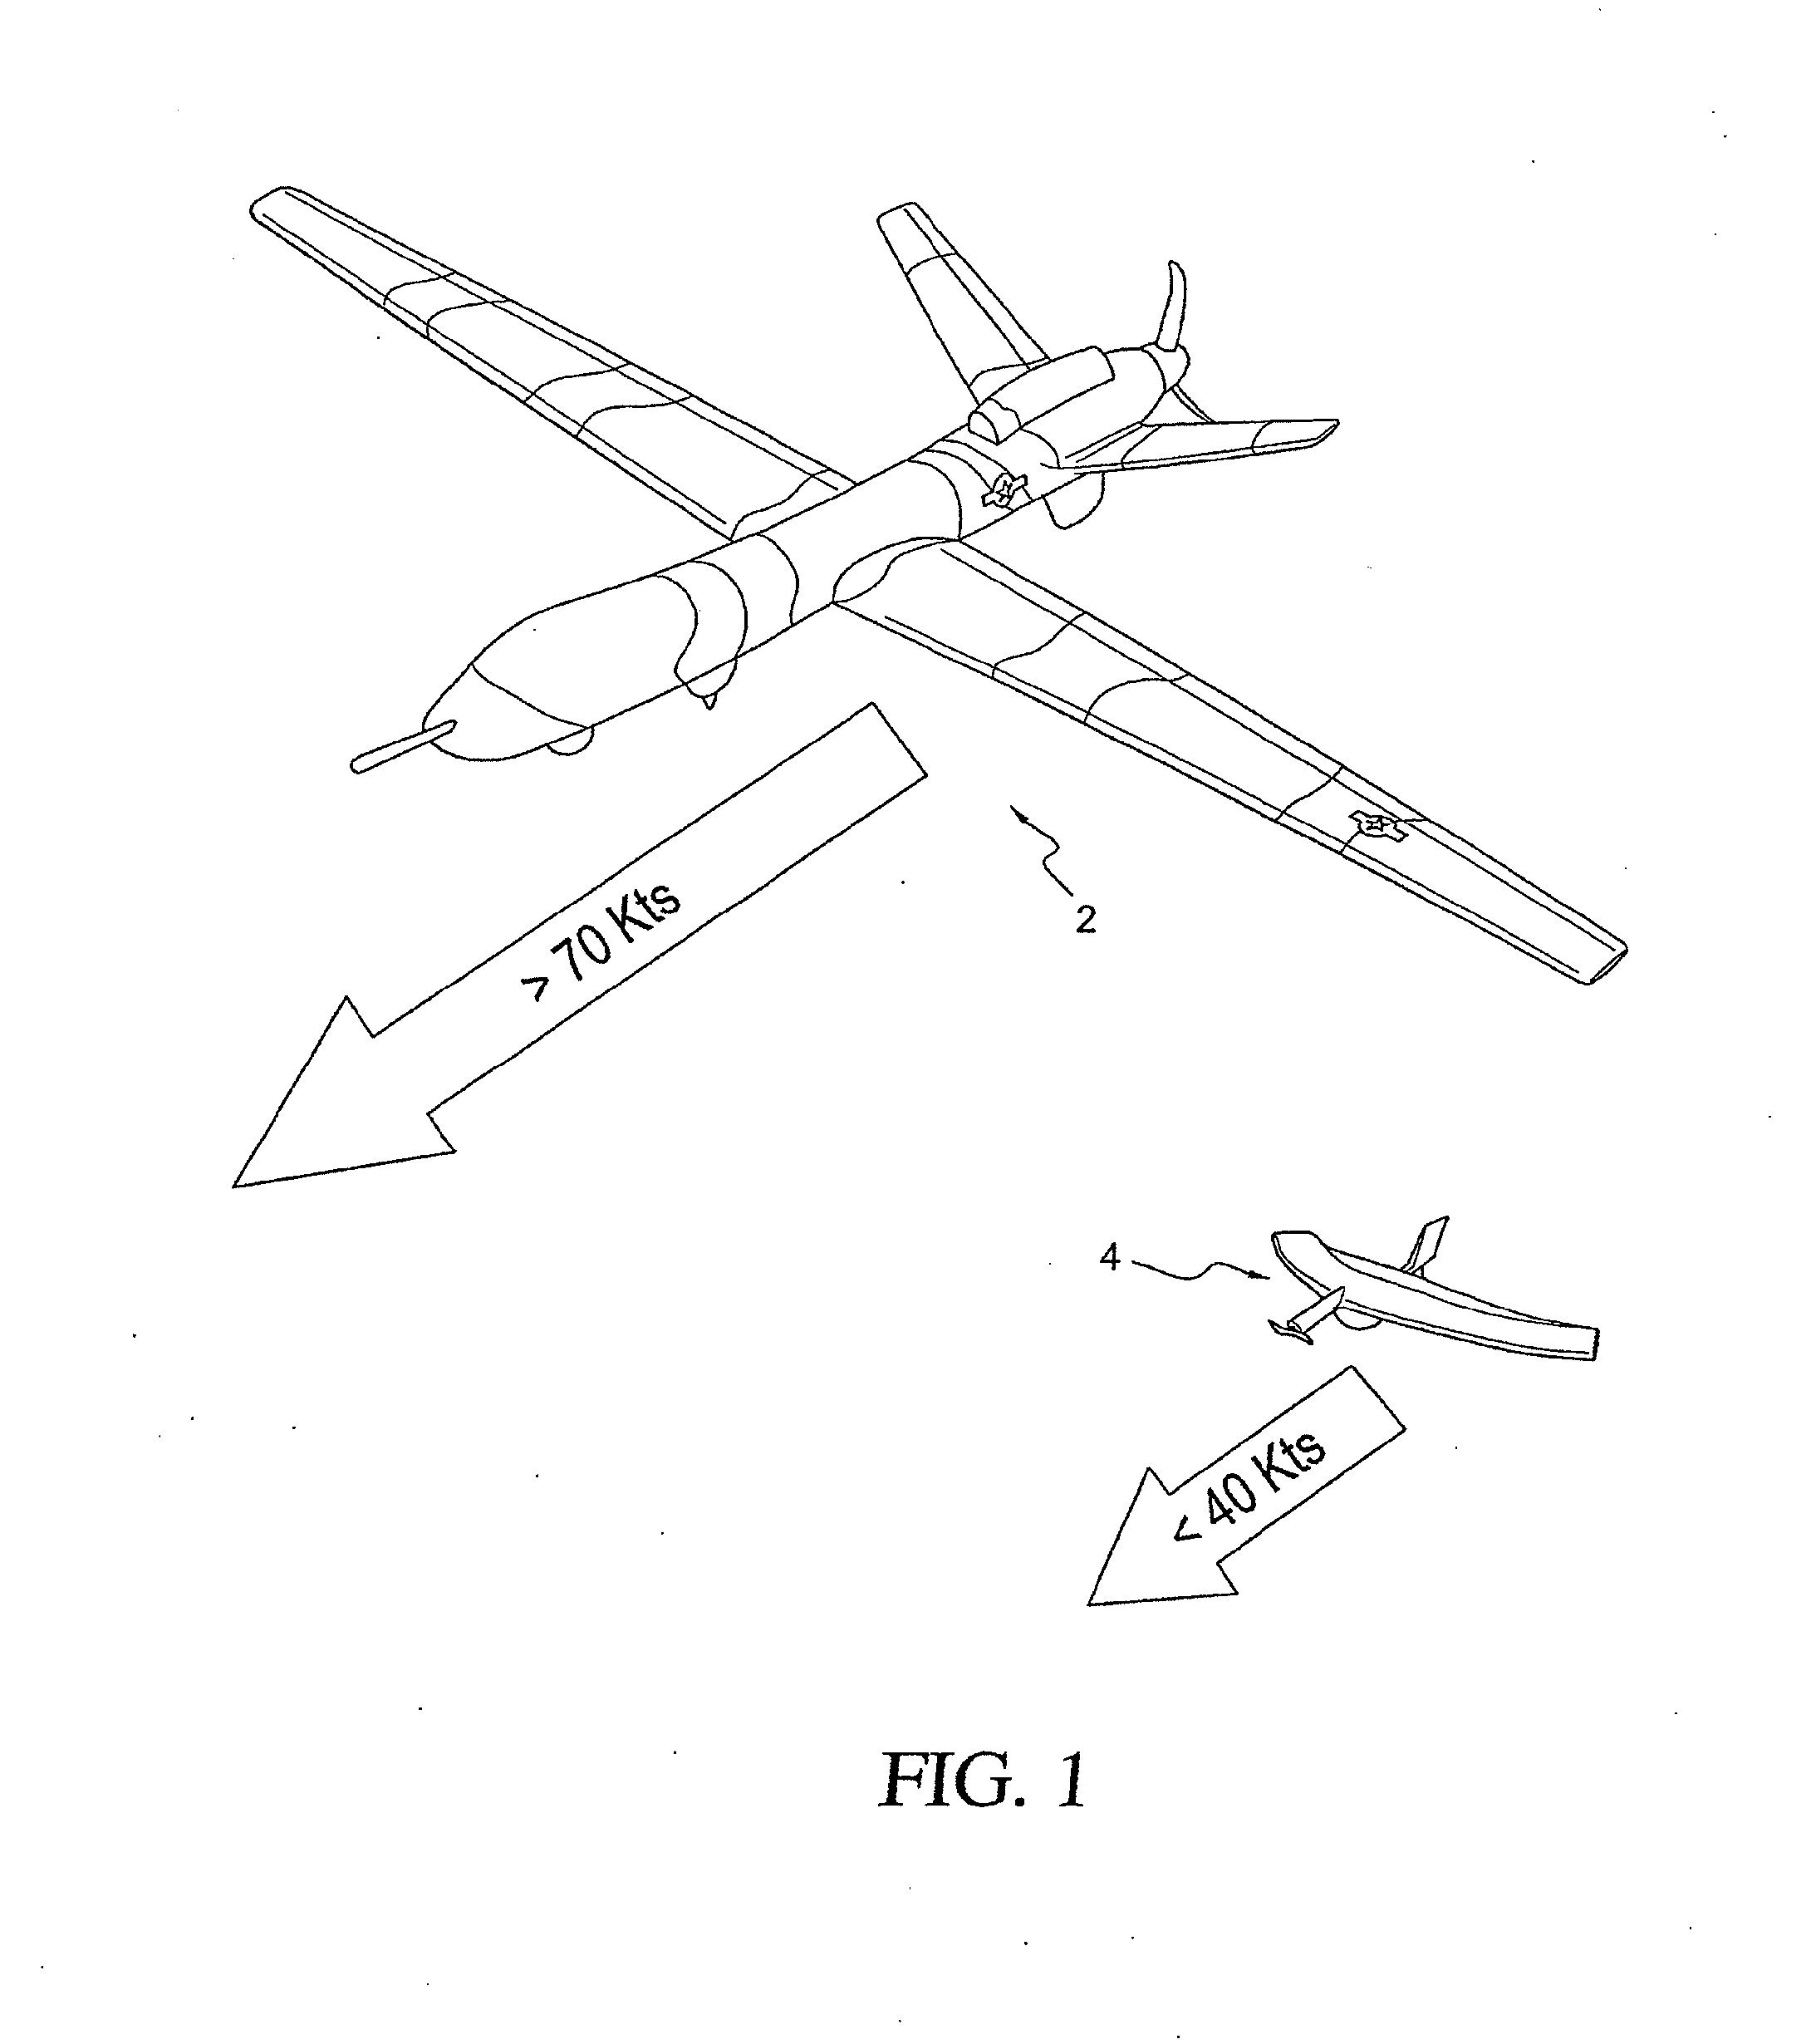 System and method for the retrieval of a smaller unmanned aerial vehicle by a larger unmanned aerial vehicle